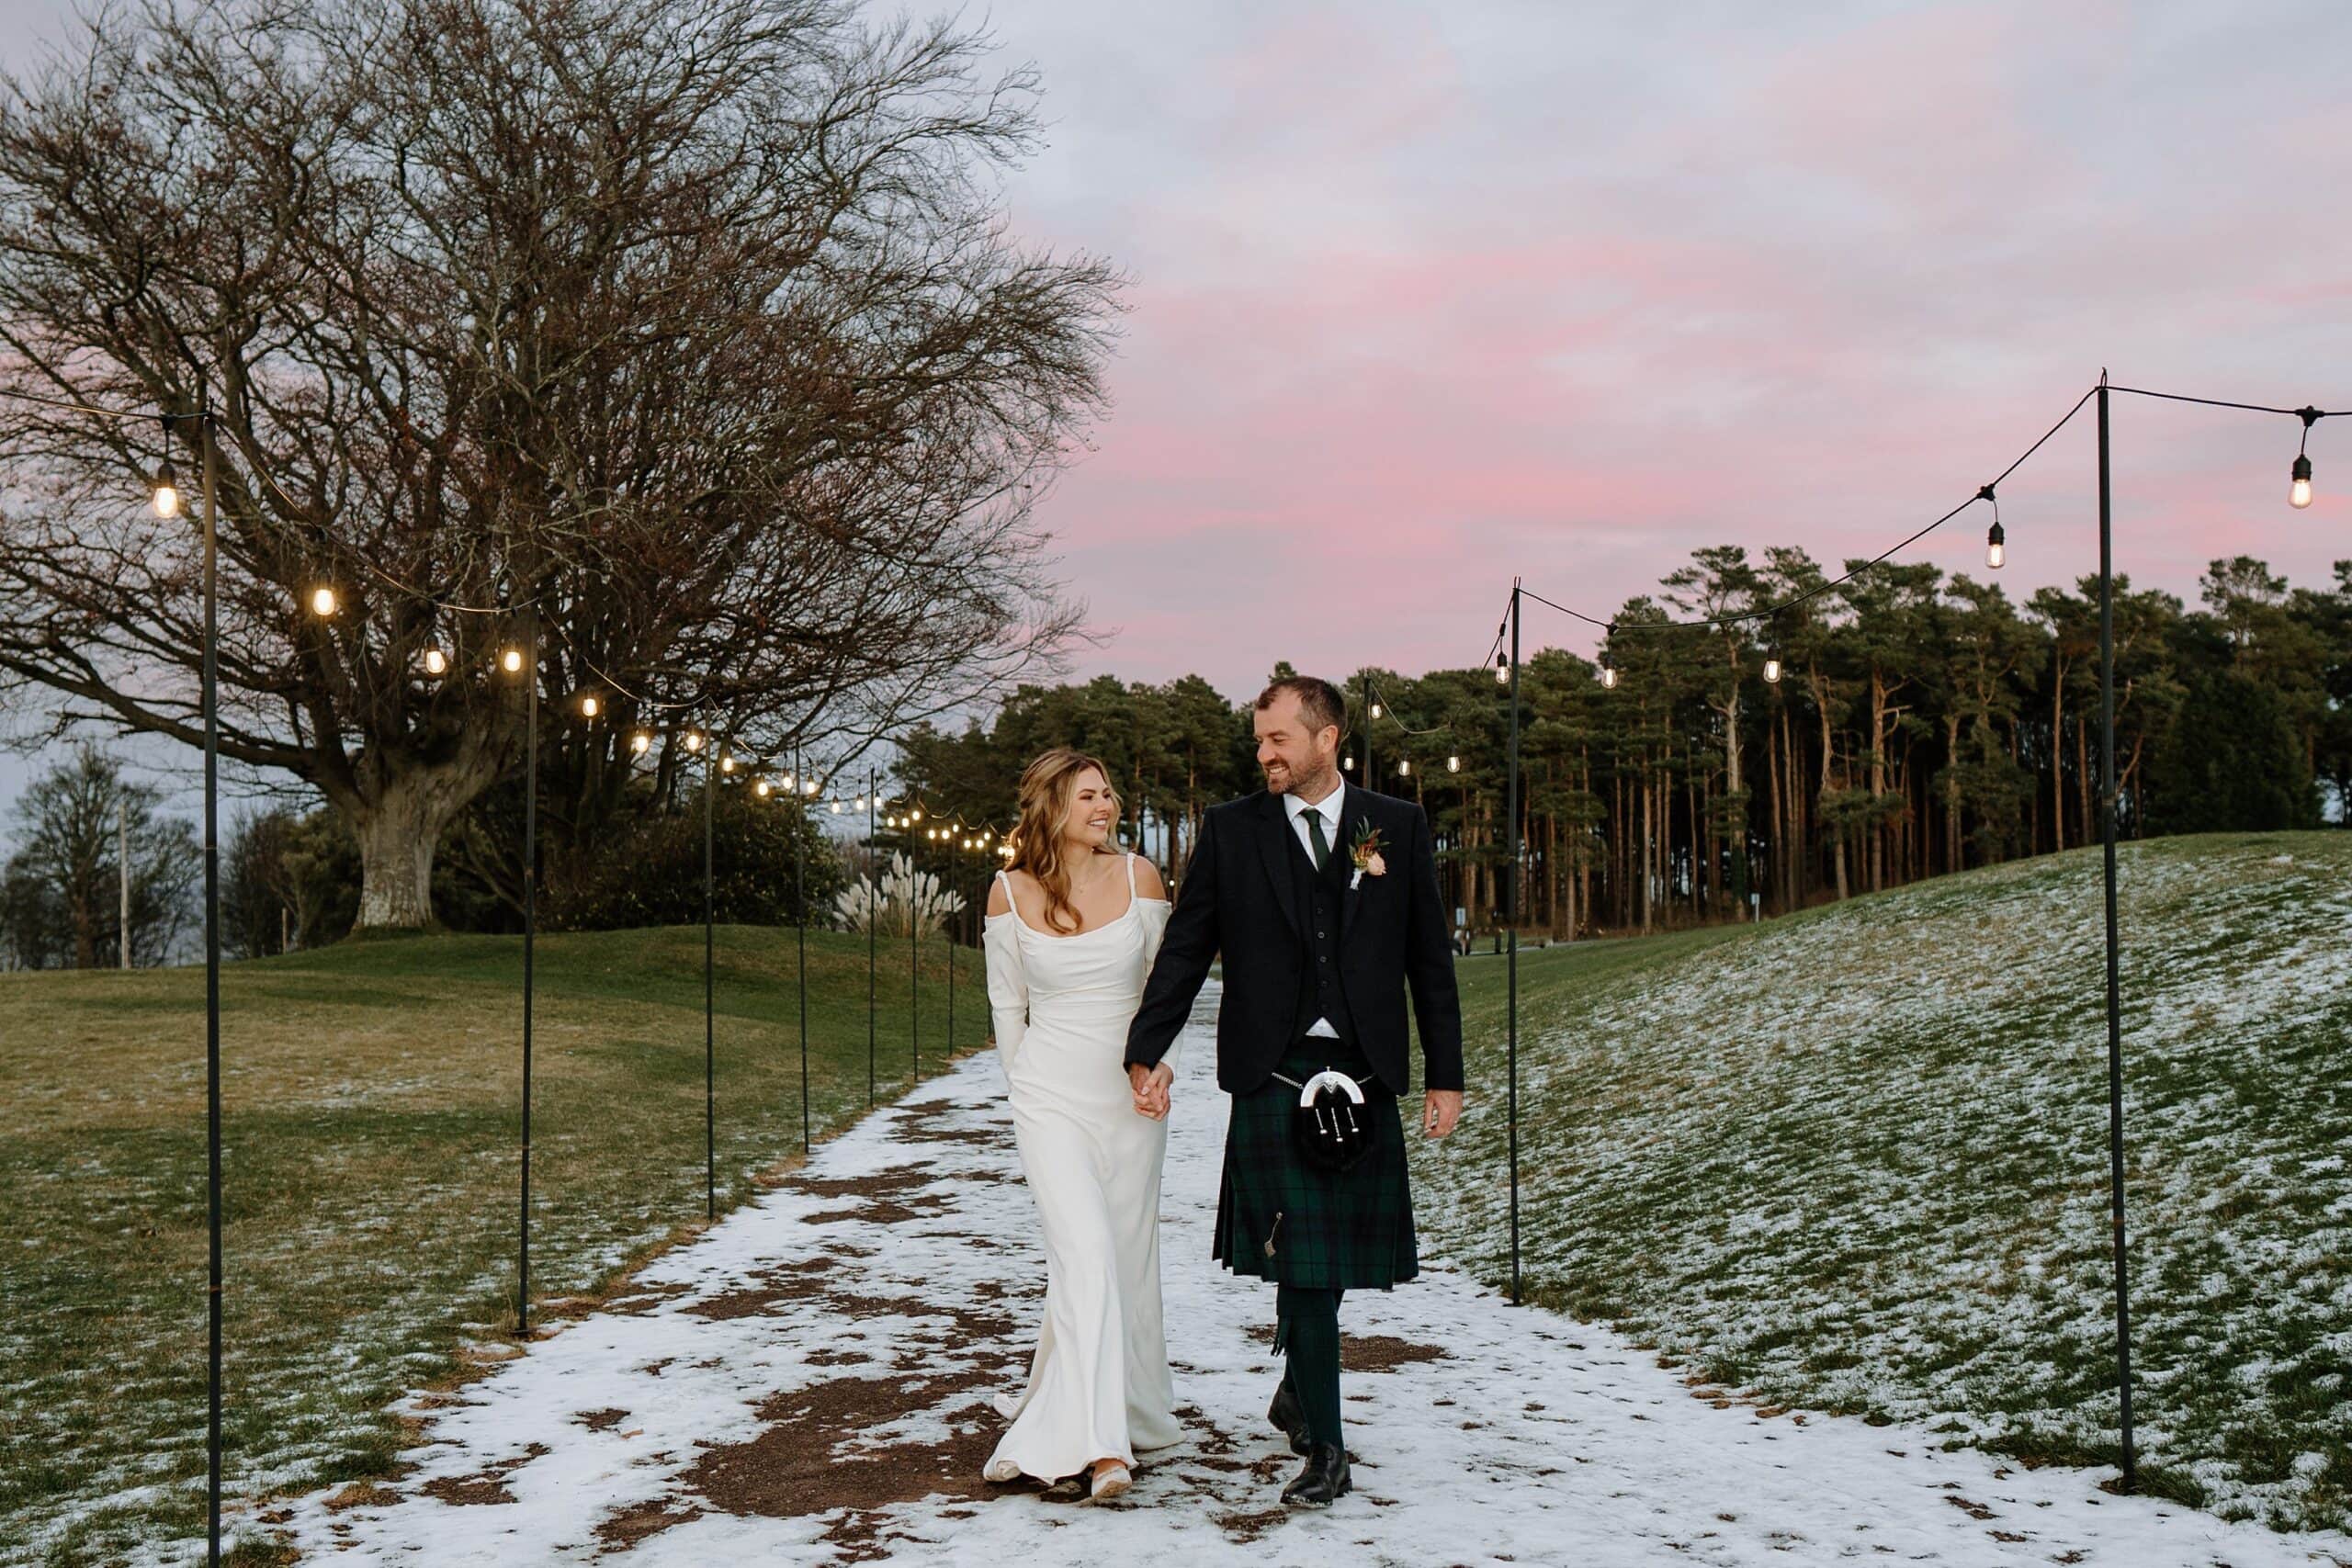 external outside view of dunglass estate wedding photos of bride and groom with festoon lighting on snowy winter day scotland